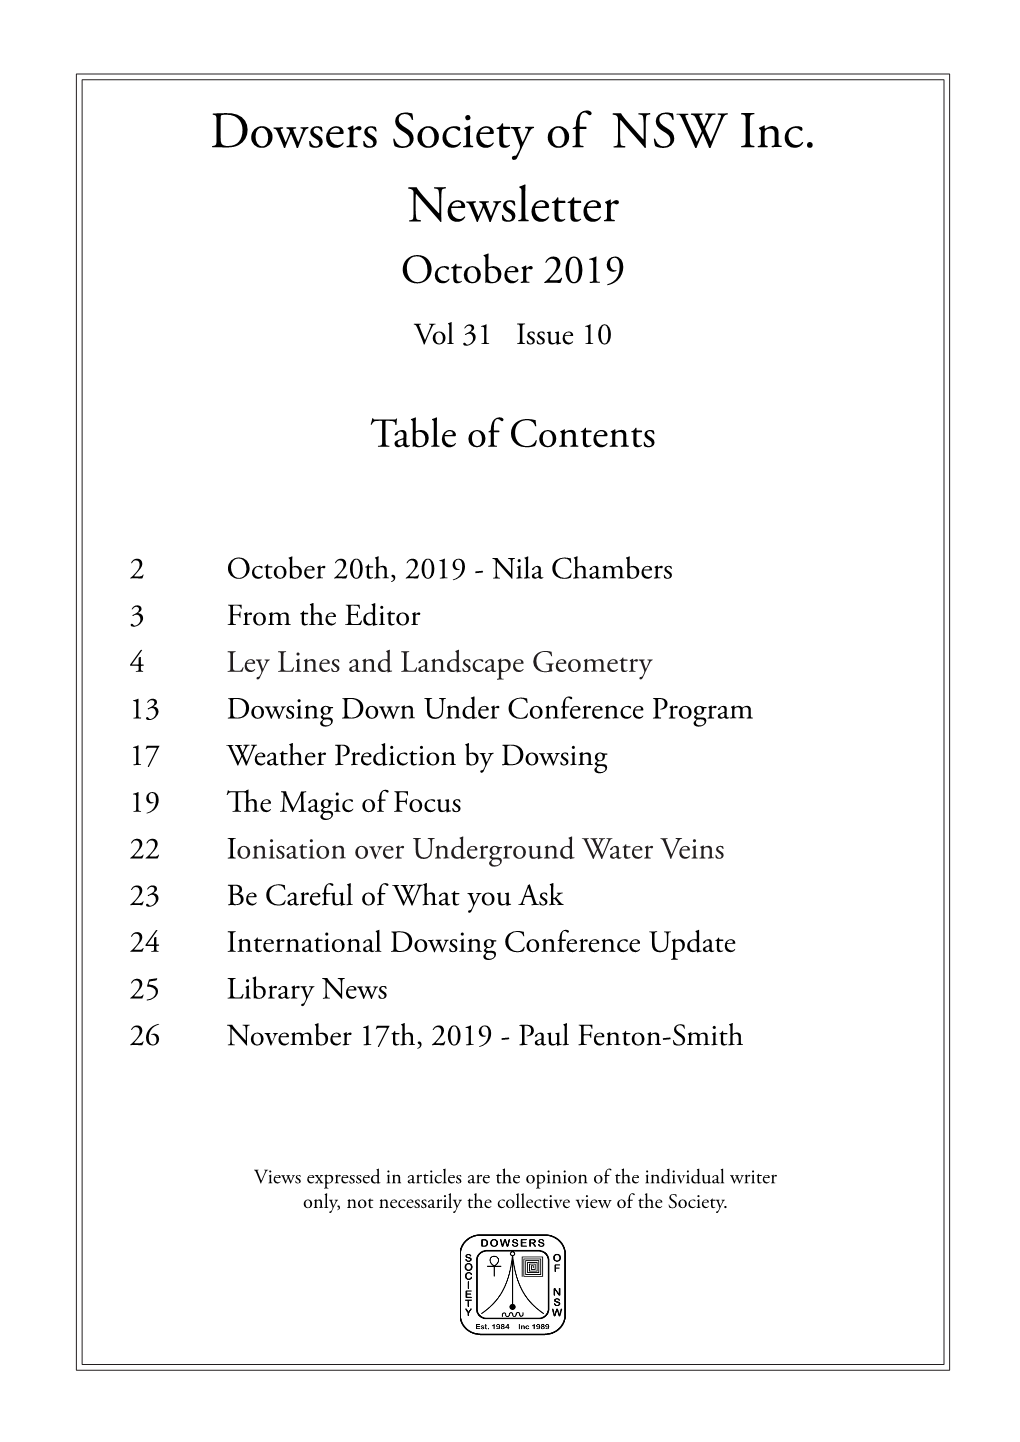 Dowsers Society of NSW Inc. Newsletter October 2019 Vol 31 Issue 10